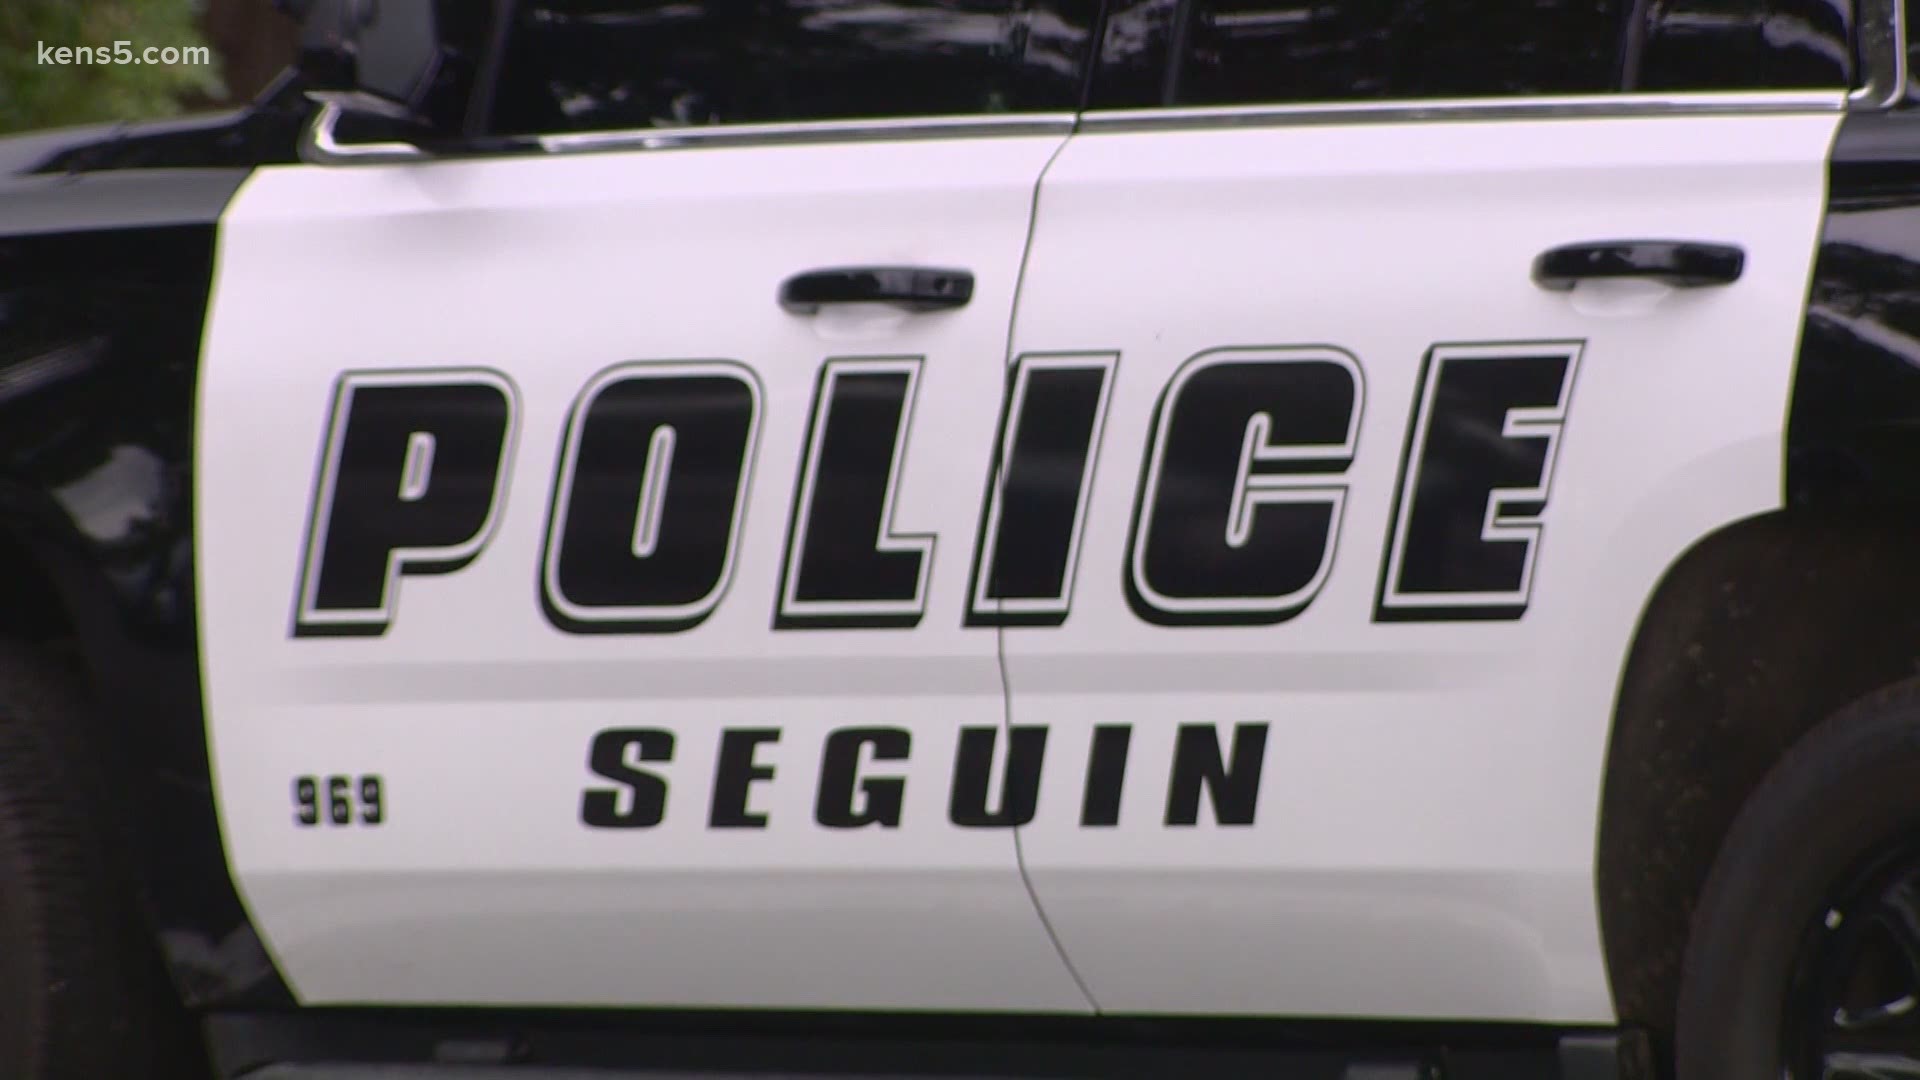 A driver said that a Seguin police officer had her sit in the front seat of his patrol car, asked questions about drugs and asked to search her vehicle.